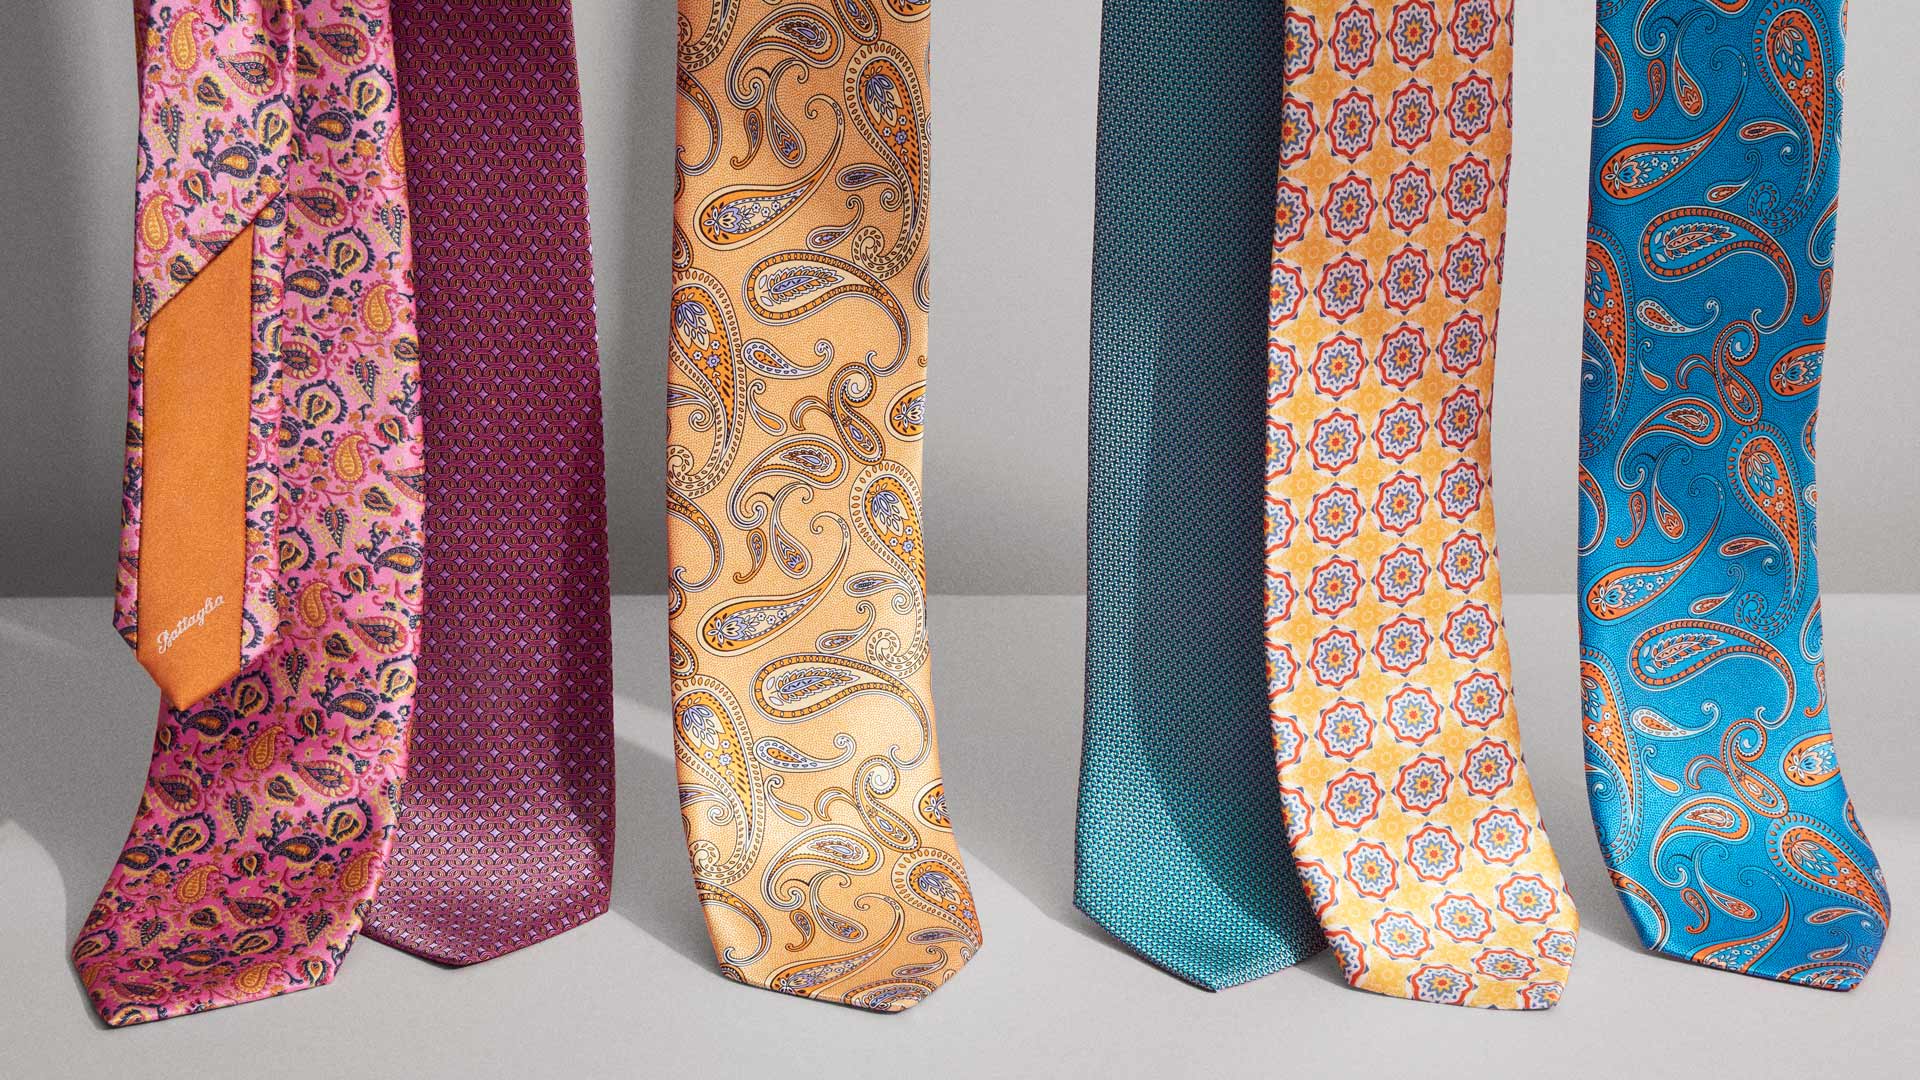 A set of seven colorful Battaglia ties on a grey background